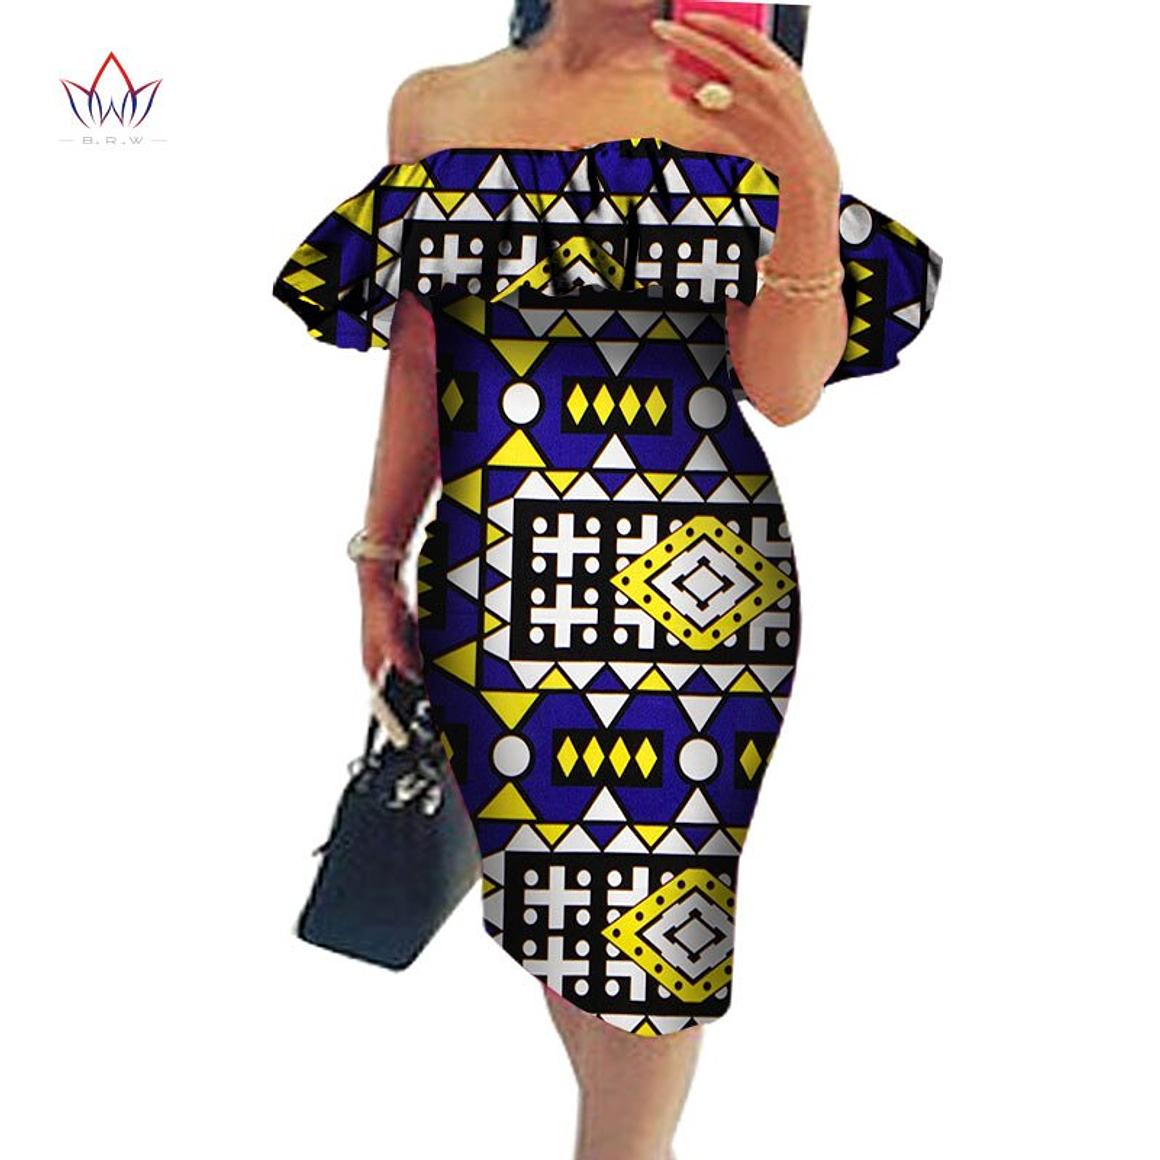 Cotton Off-shoulder African Print Bodycon Dress - Various Colours Available in UK Sizes 8 - 22